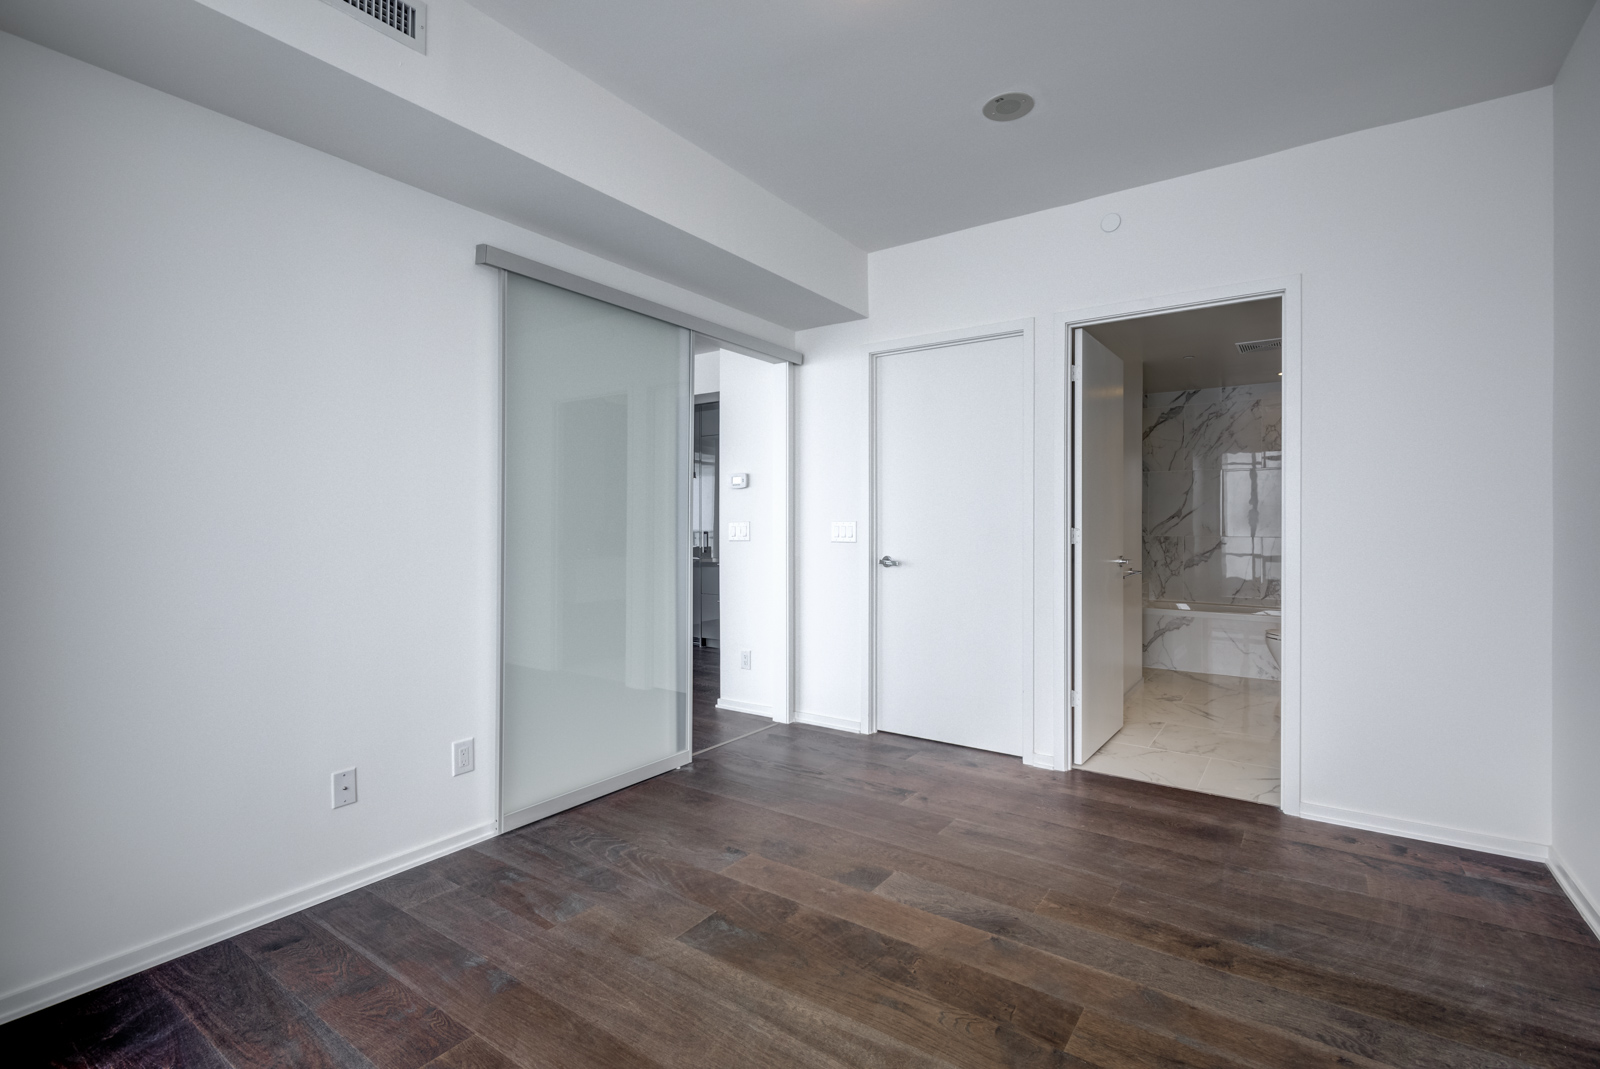 Sliding doors connect the master bedroom to the living and dining areas.